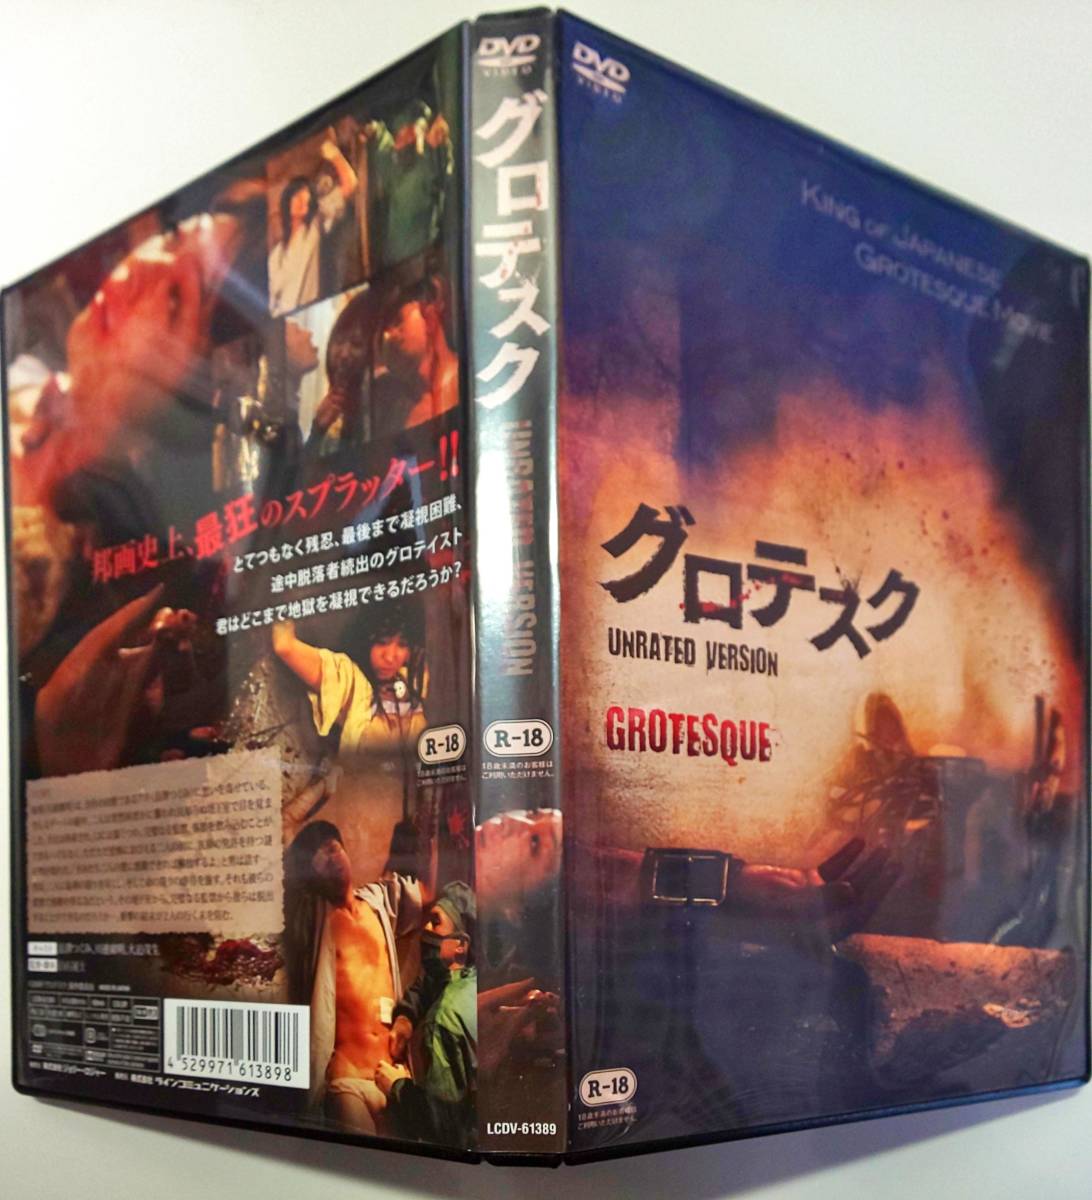 DVD邦] グロテスク GROTESQUE UNRATED VERSION[白石晃士監督作品／長澤 